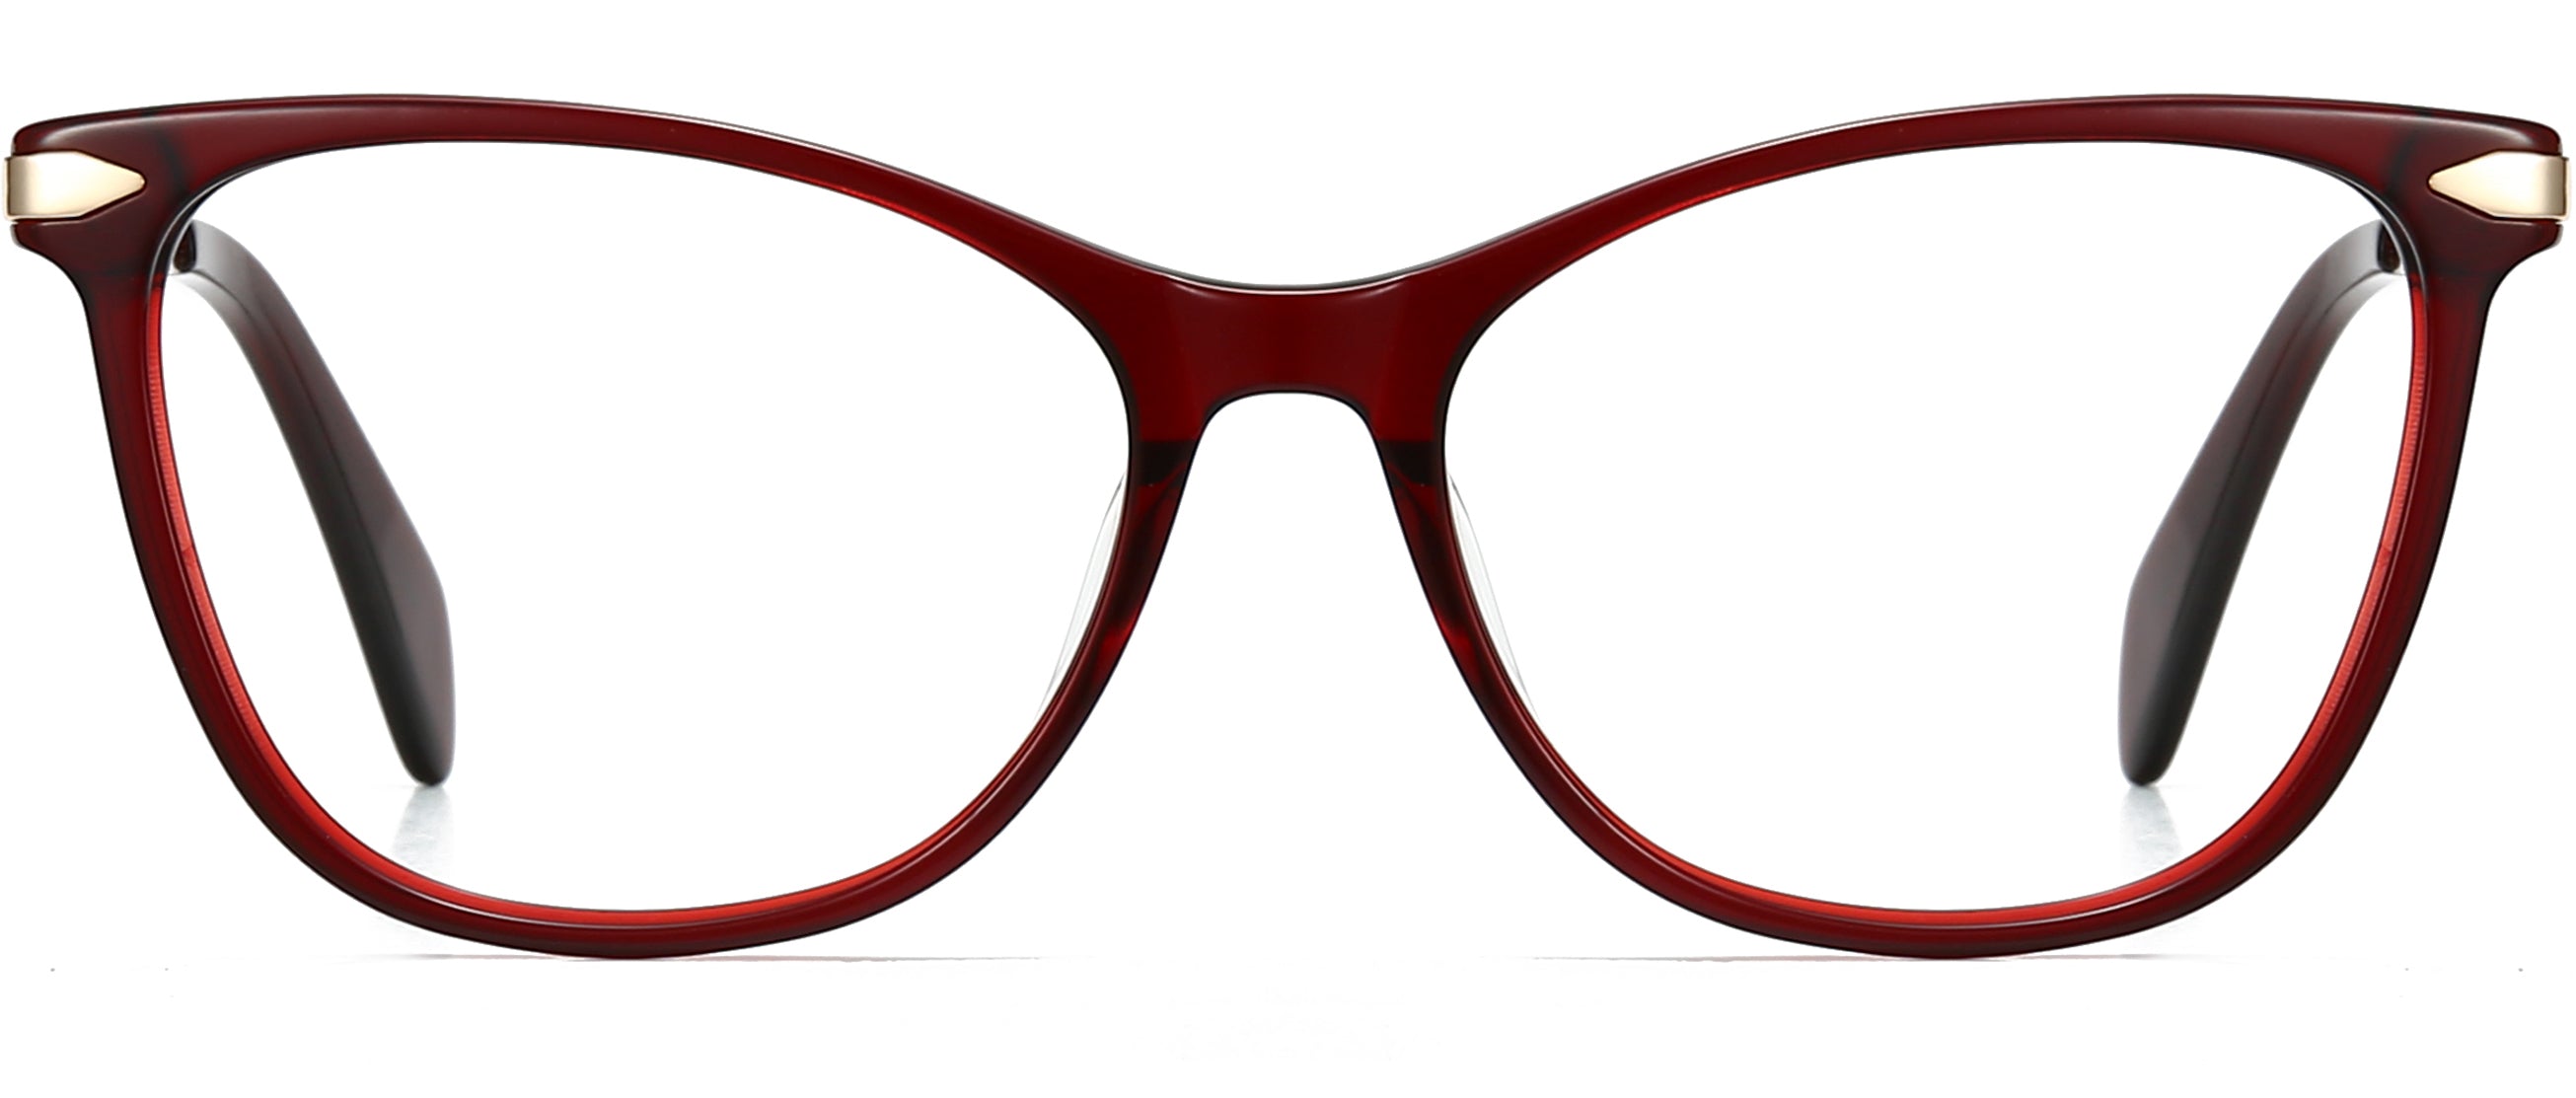 Cervine Red Mixed Eyeglasses from ANRRI,Front View